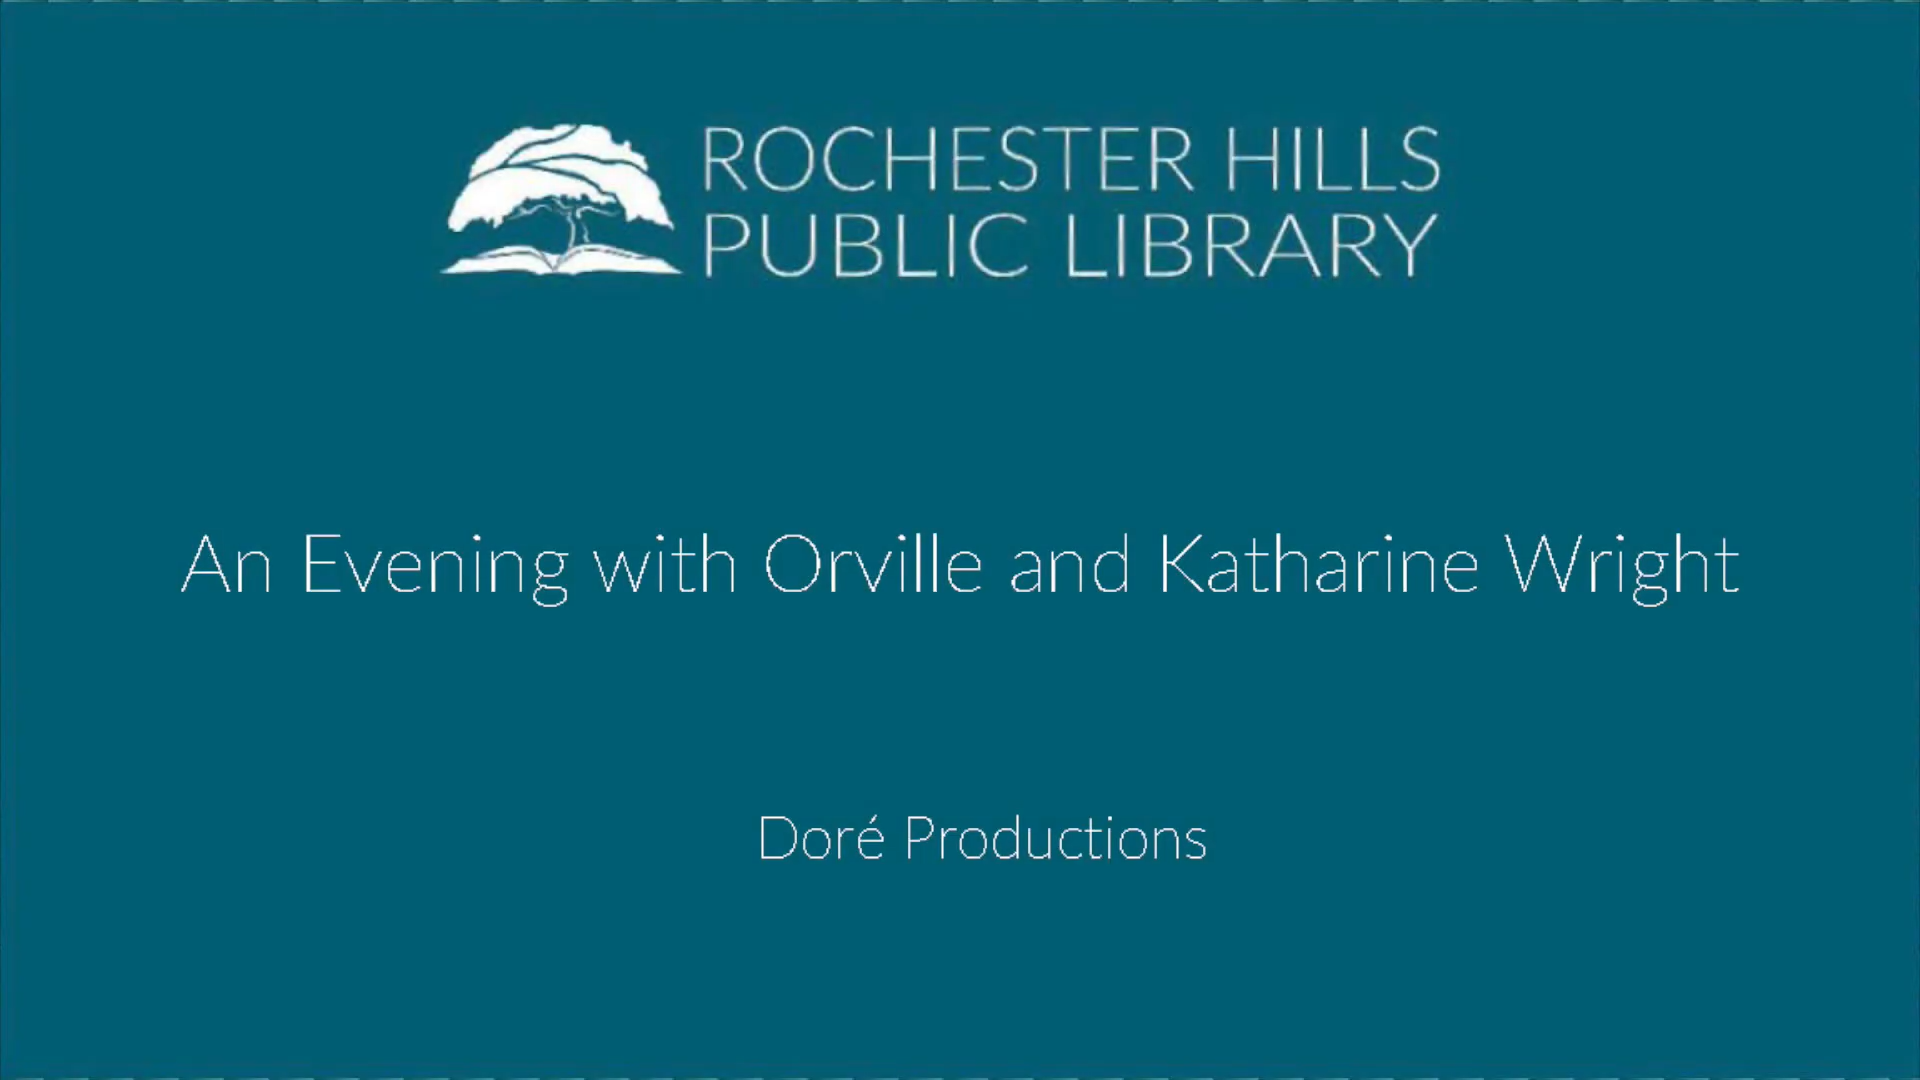 An Evening with Orville and Katharine Wright